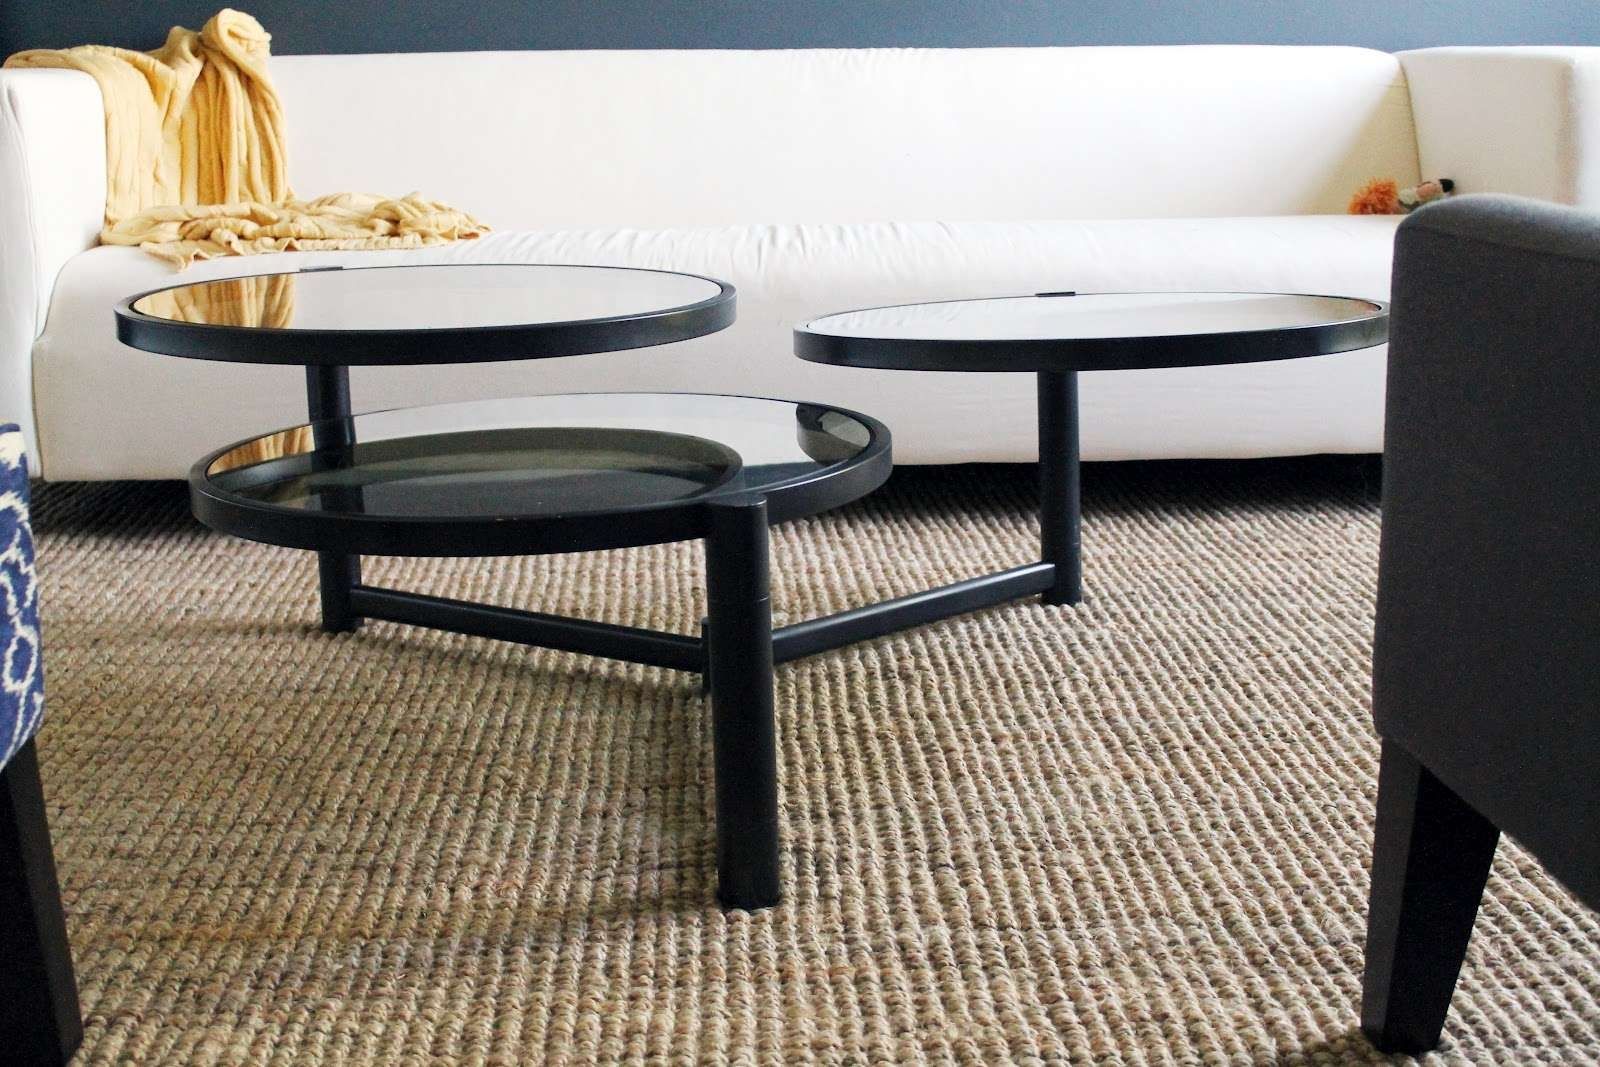 Widely Used Quirky Coffee Tables With Our $50 Quirky Cool Coffee Table Find – Chris Loves Julia (View 2 of 20)